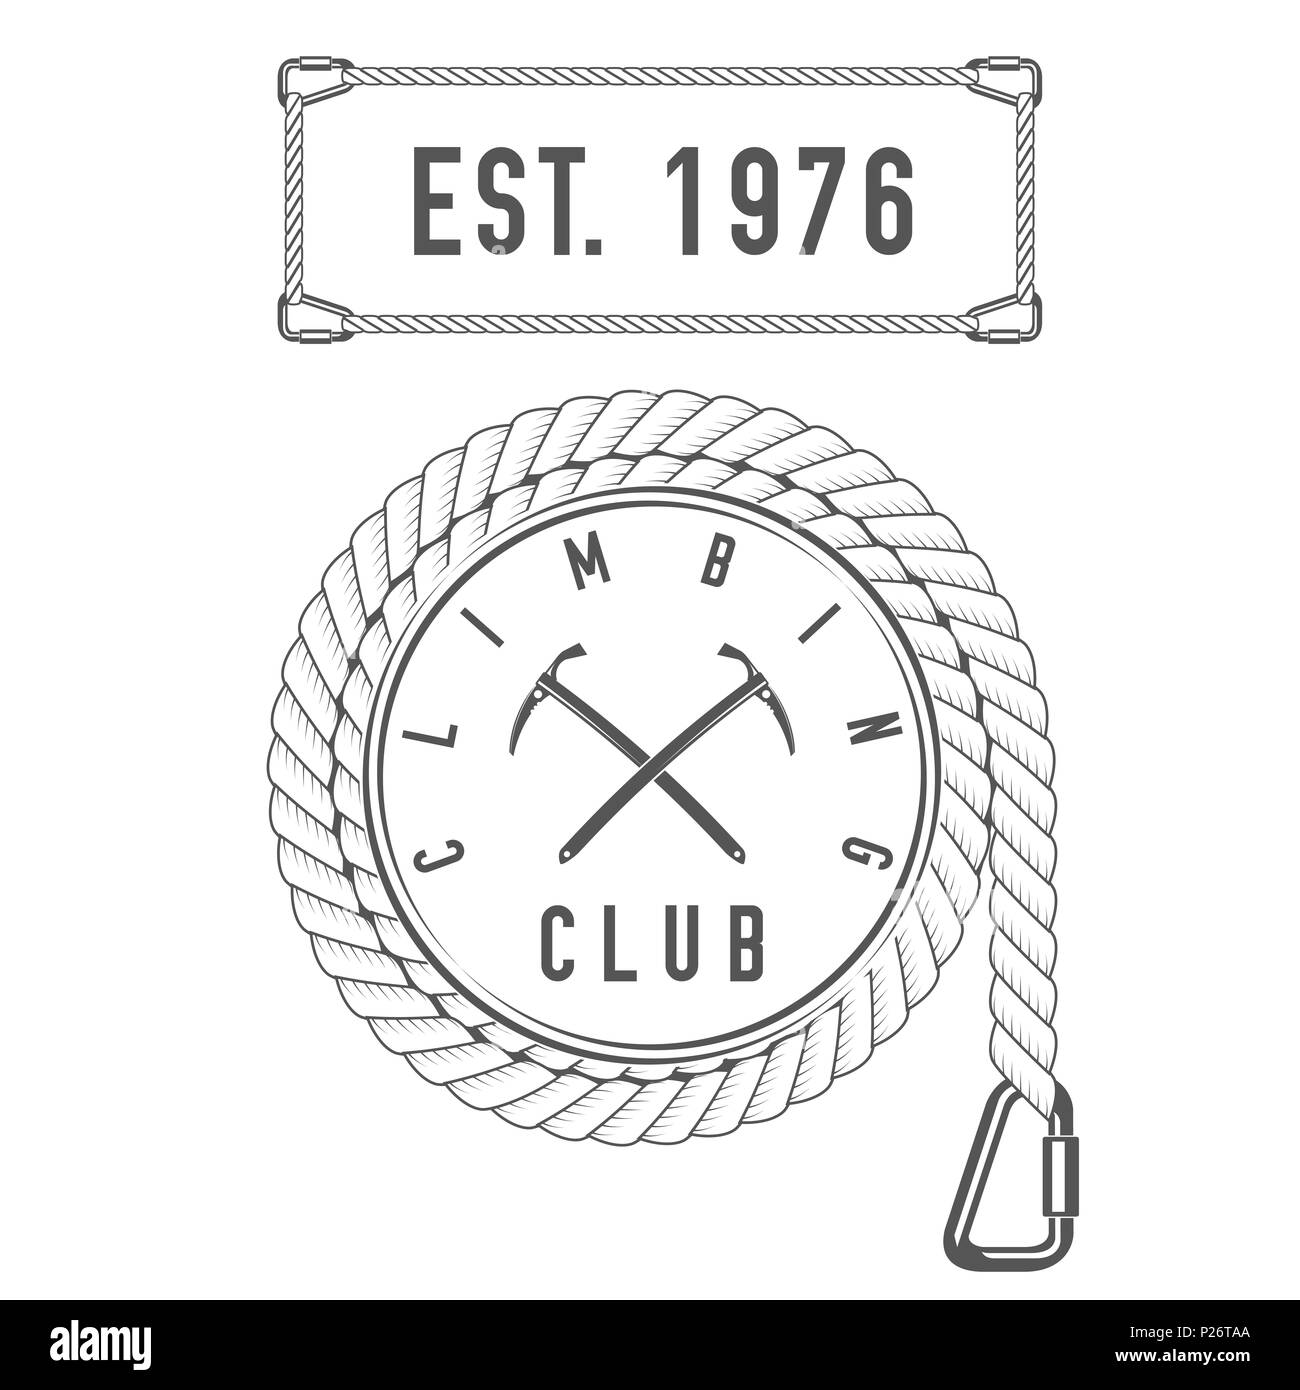 Climbing Club - Mountain Adventure - Alpine Trip Emblem - Icon - Print - Badge Template in Vintage Black and White Style. Concept for Shirt or Label,  Stock Photo